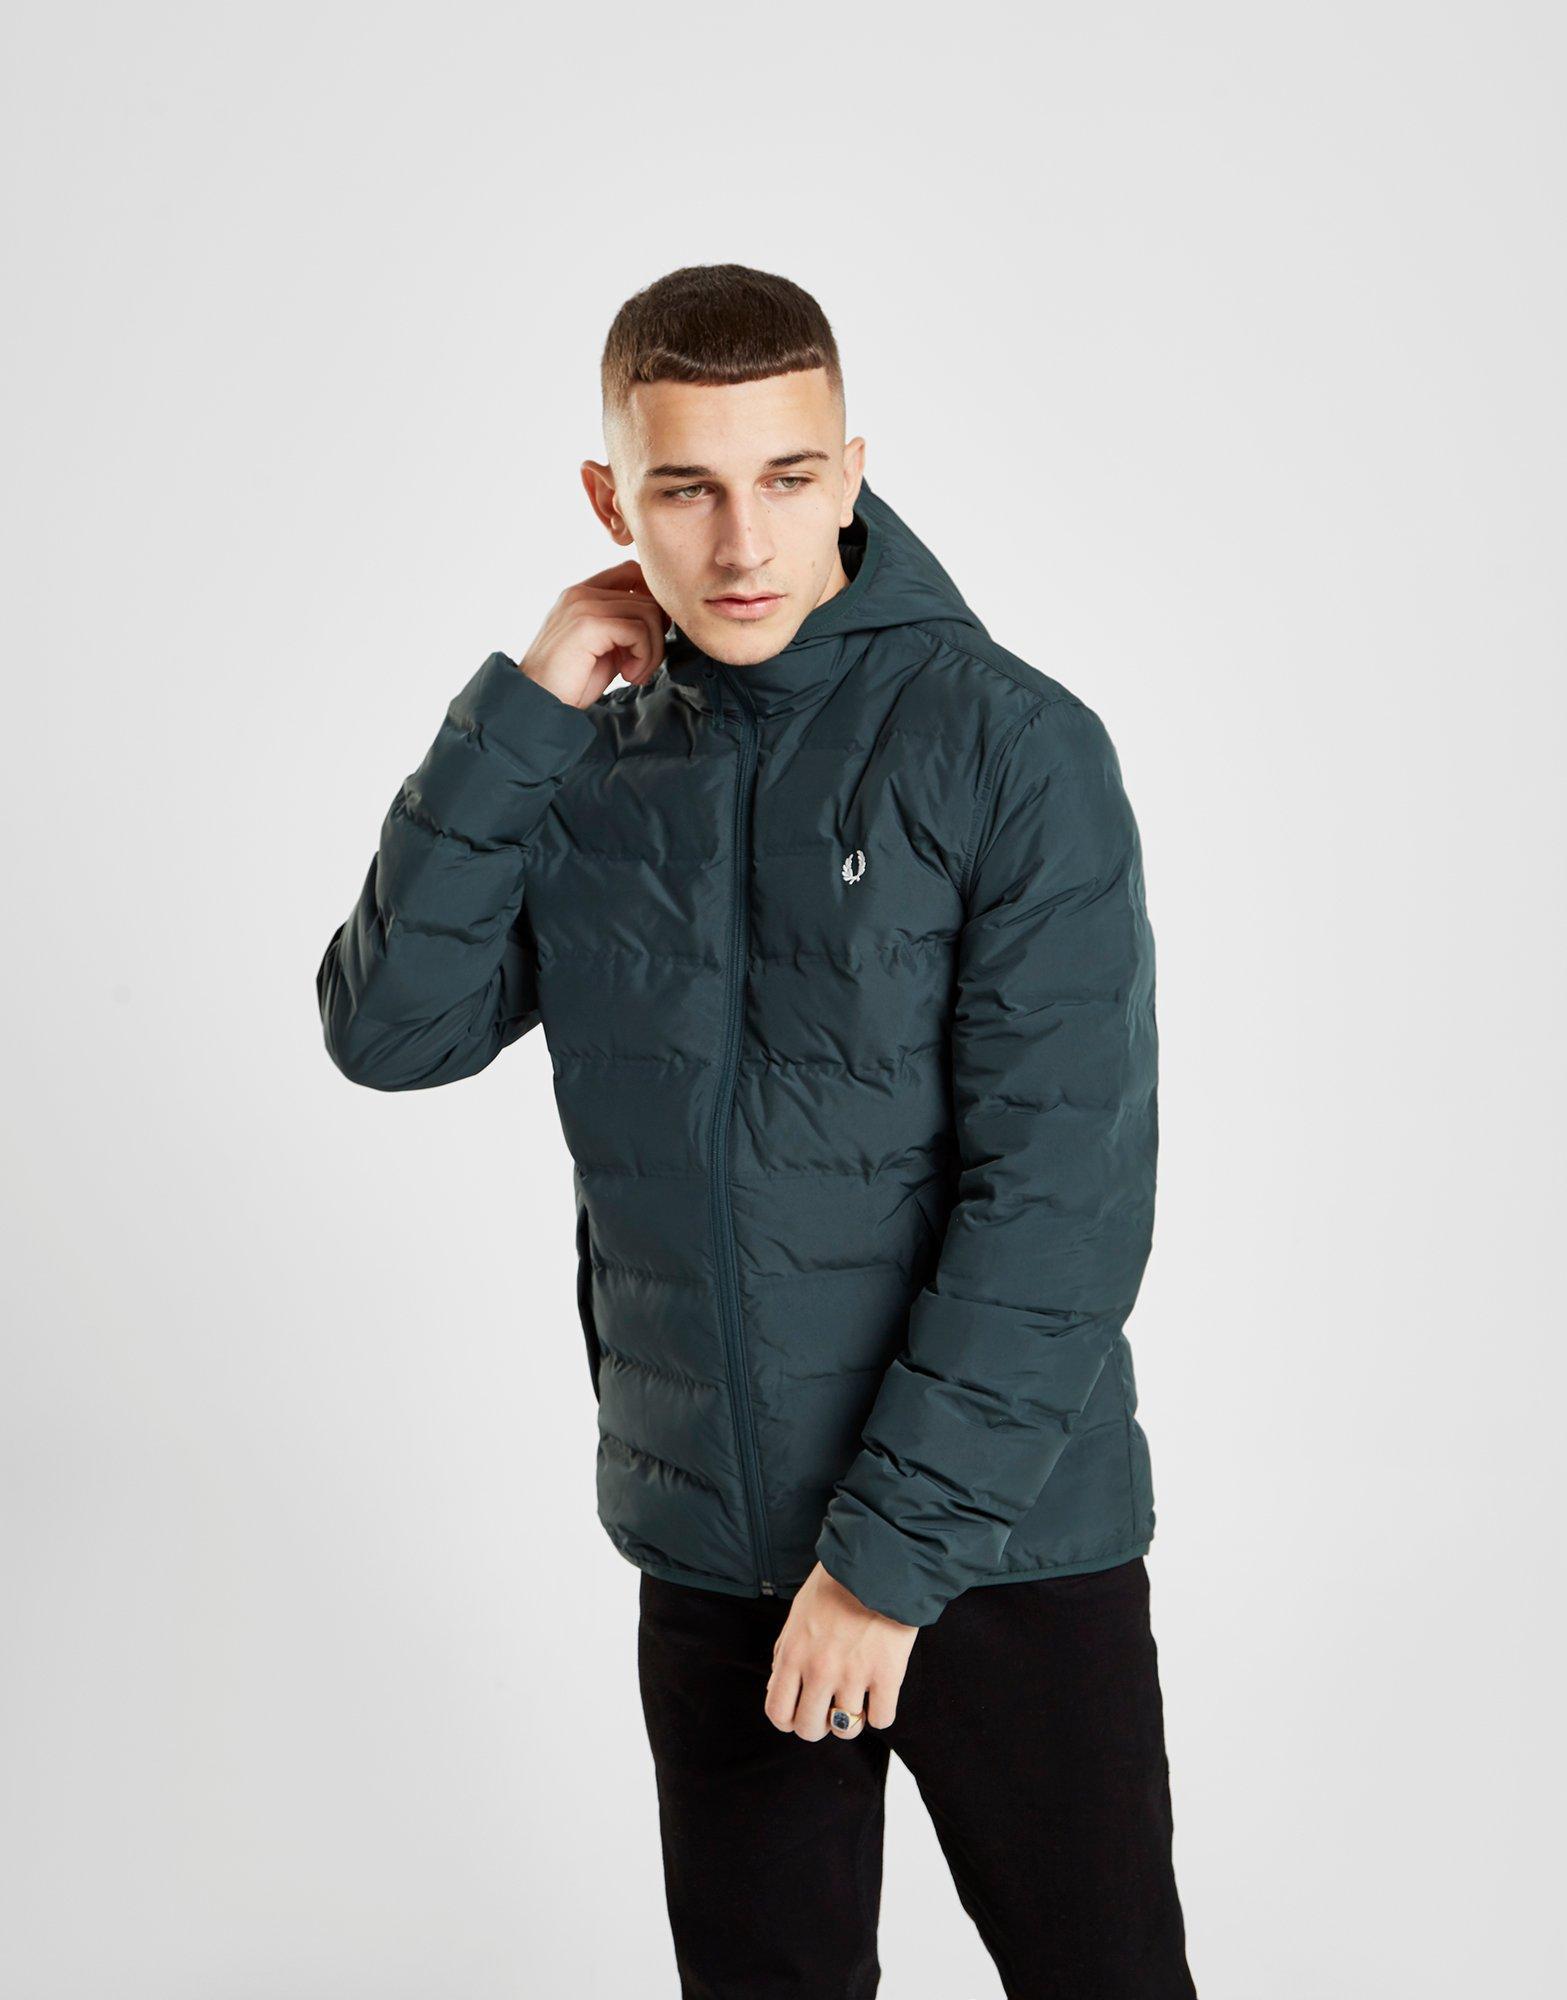 Idraulico Nave da guerra volume fred perry hooded jacket scambiare  Percentuale Penelope